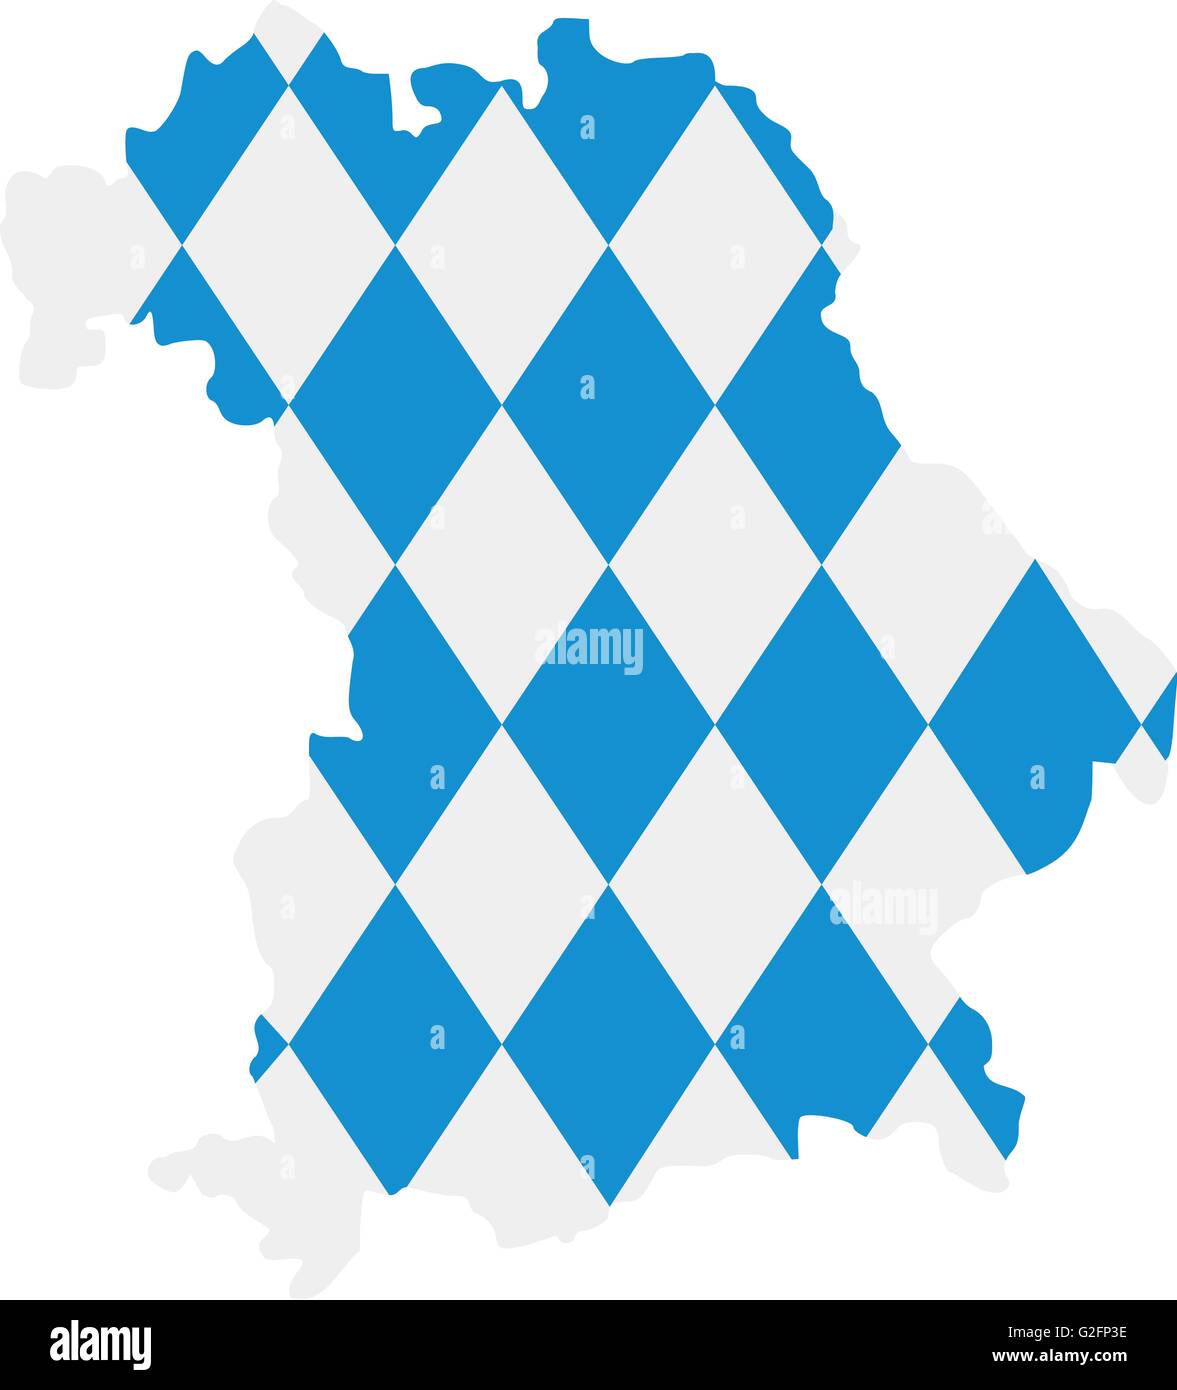 Bavaria map with flag pattern Stock Photo